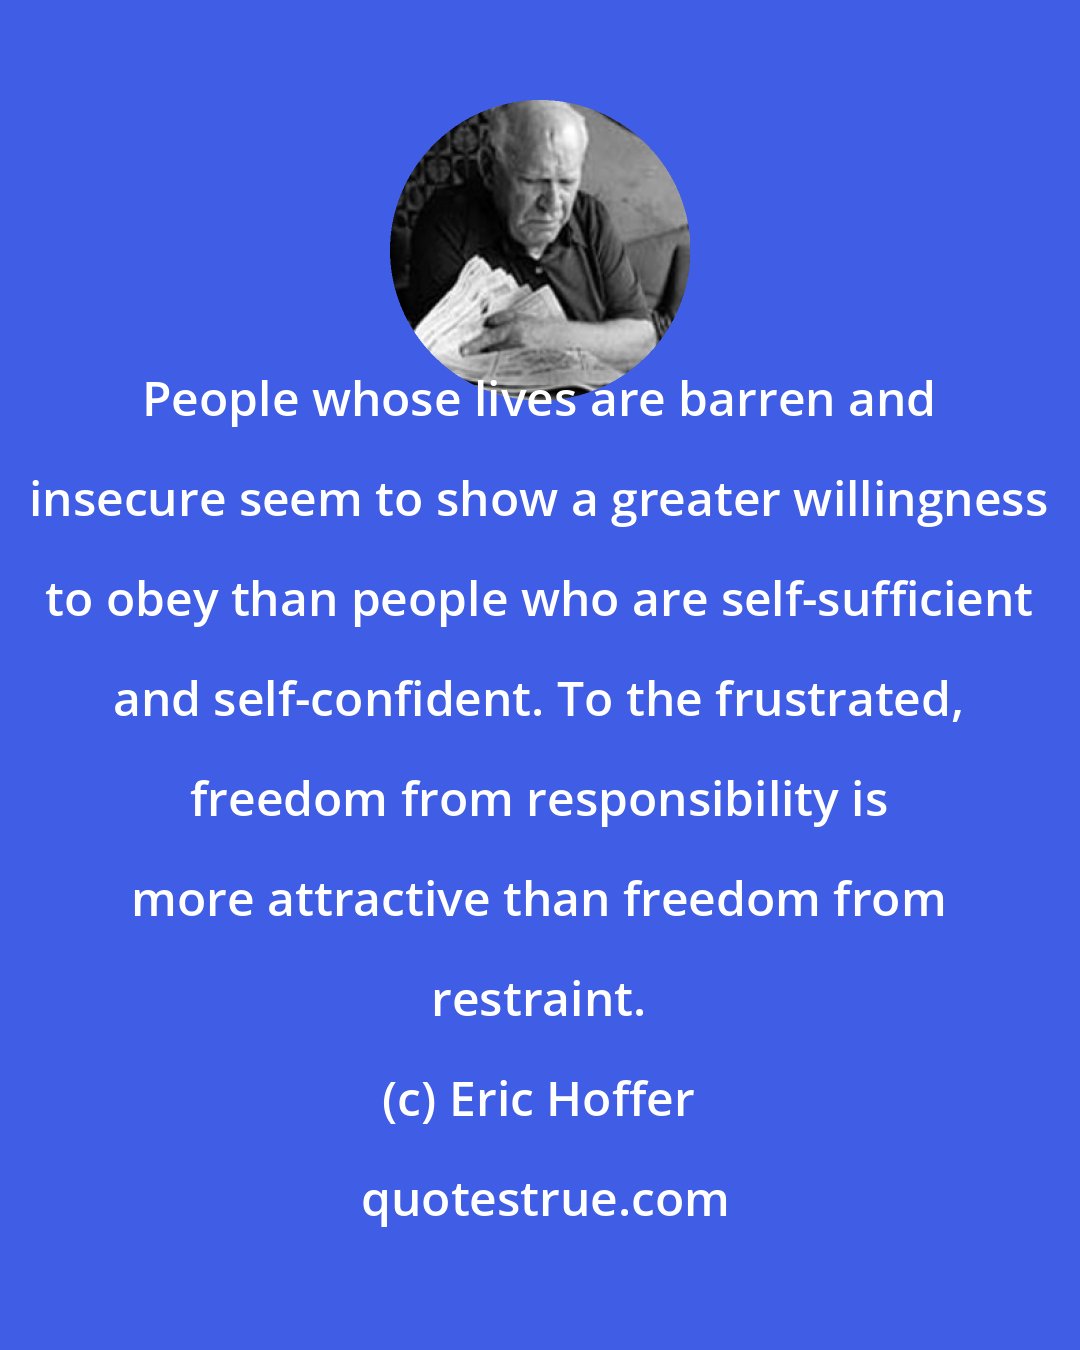 Eric Hoffer: People whose lives are barren and insecure seem to show a greater willingness to obey than people who are self-sufficient and self-confident. To the frustrated, freedom from responsibility is more attractive than freedom from restraint.